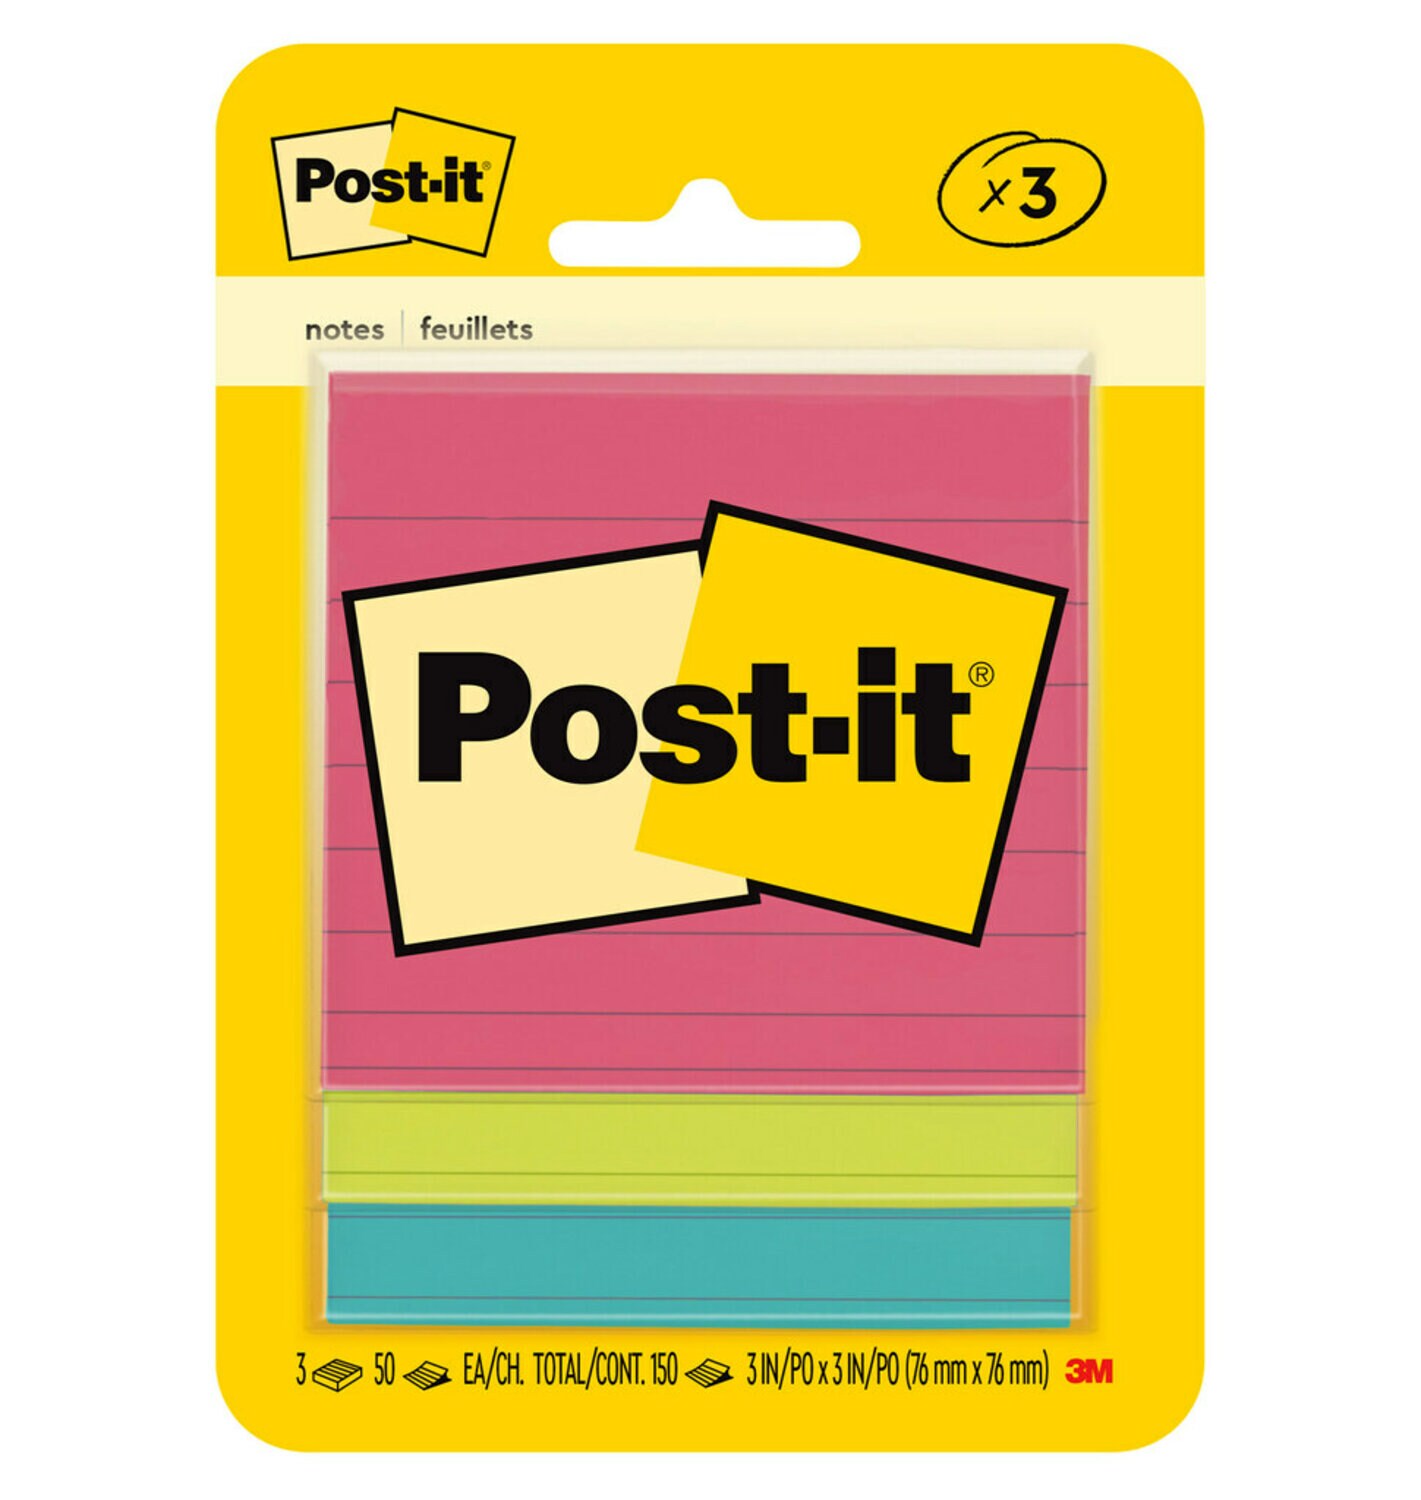 7100140818 - Post-it Notes 6301, 3 in x 3 in (76 mm x 76 mm) Cape Town